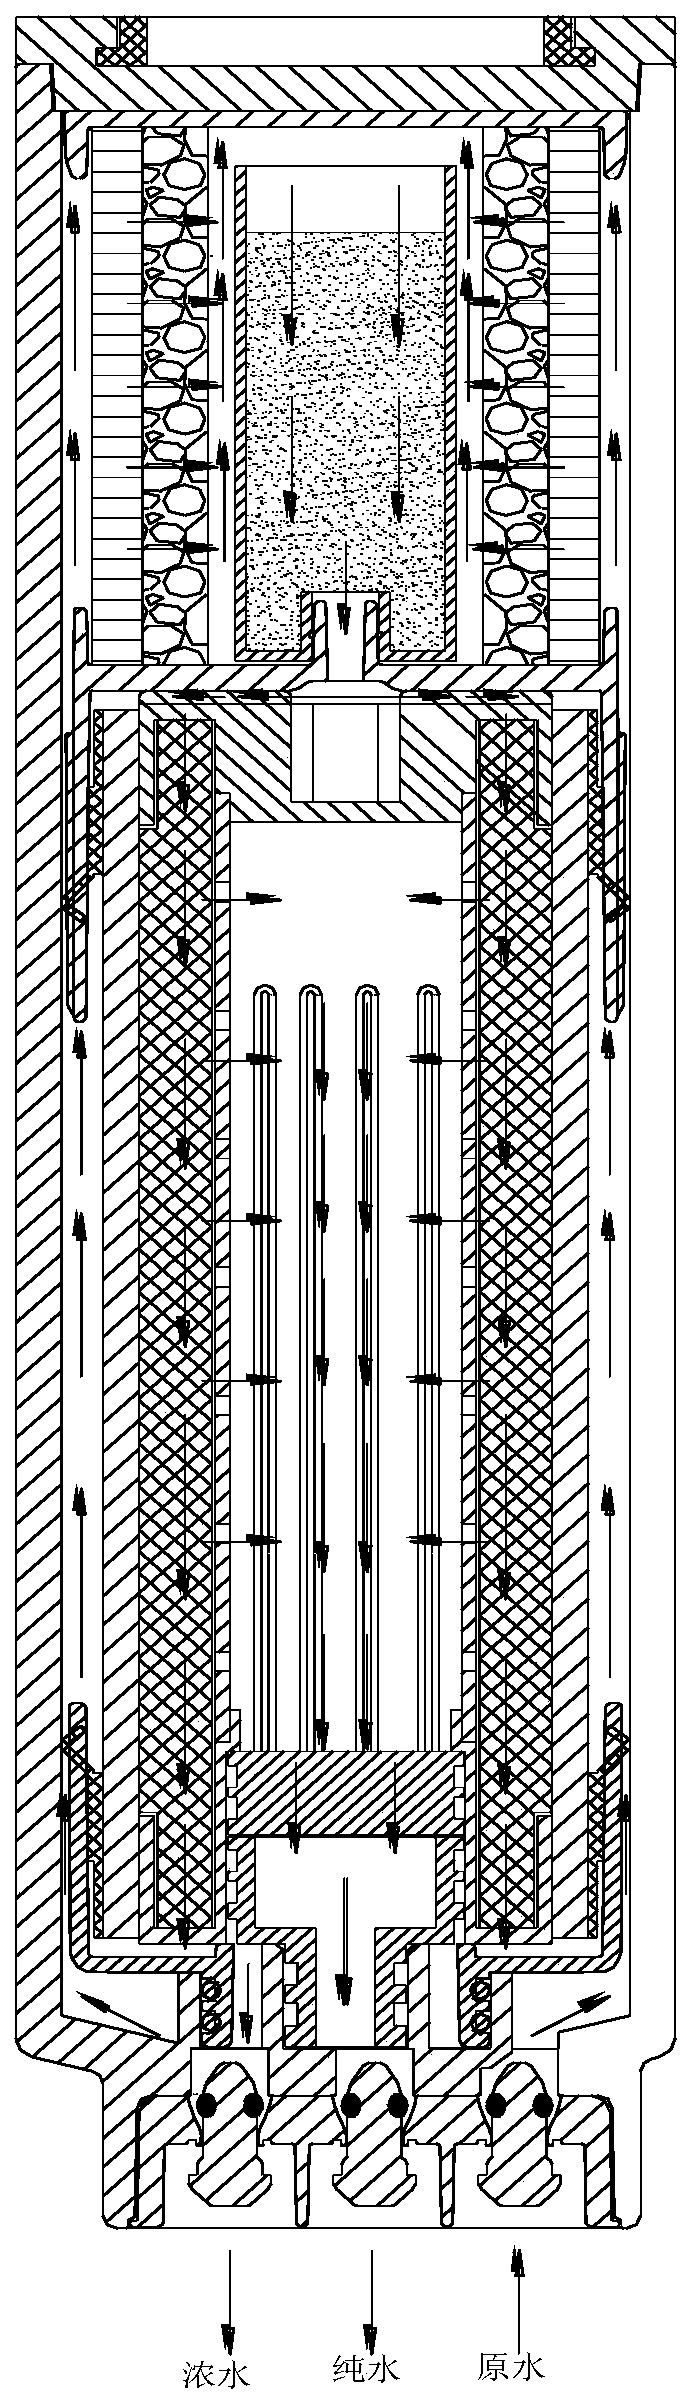 Composite filter core assembly and water purification system